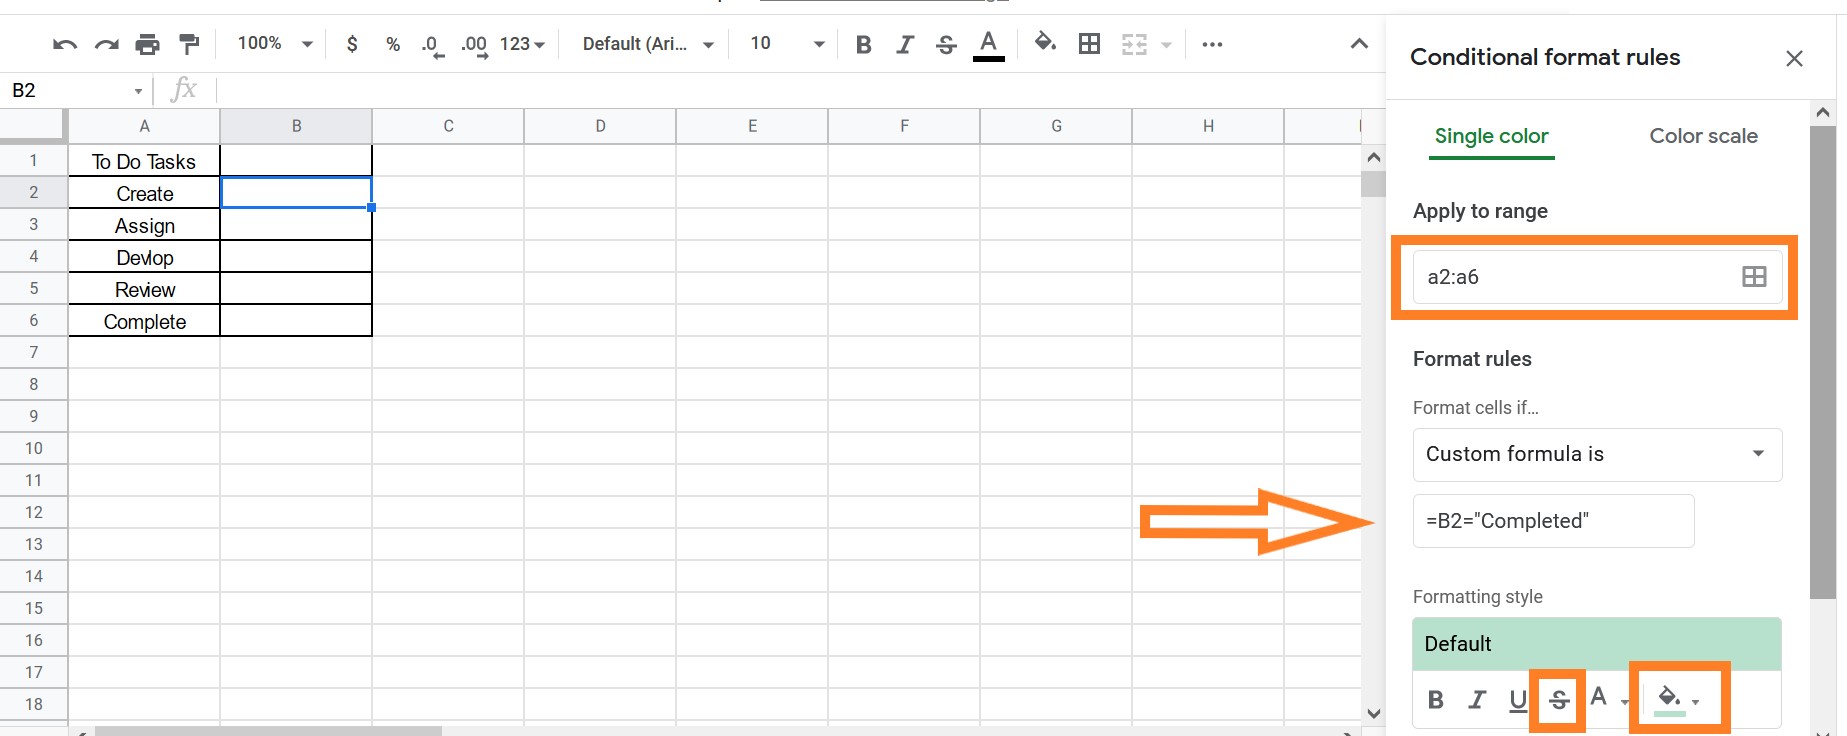 How to Strikethrough in Google Sheets